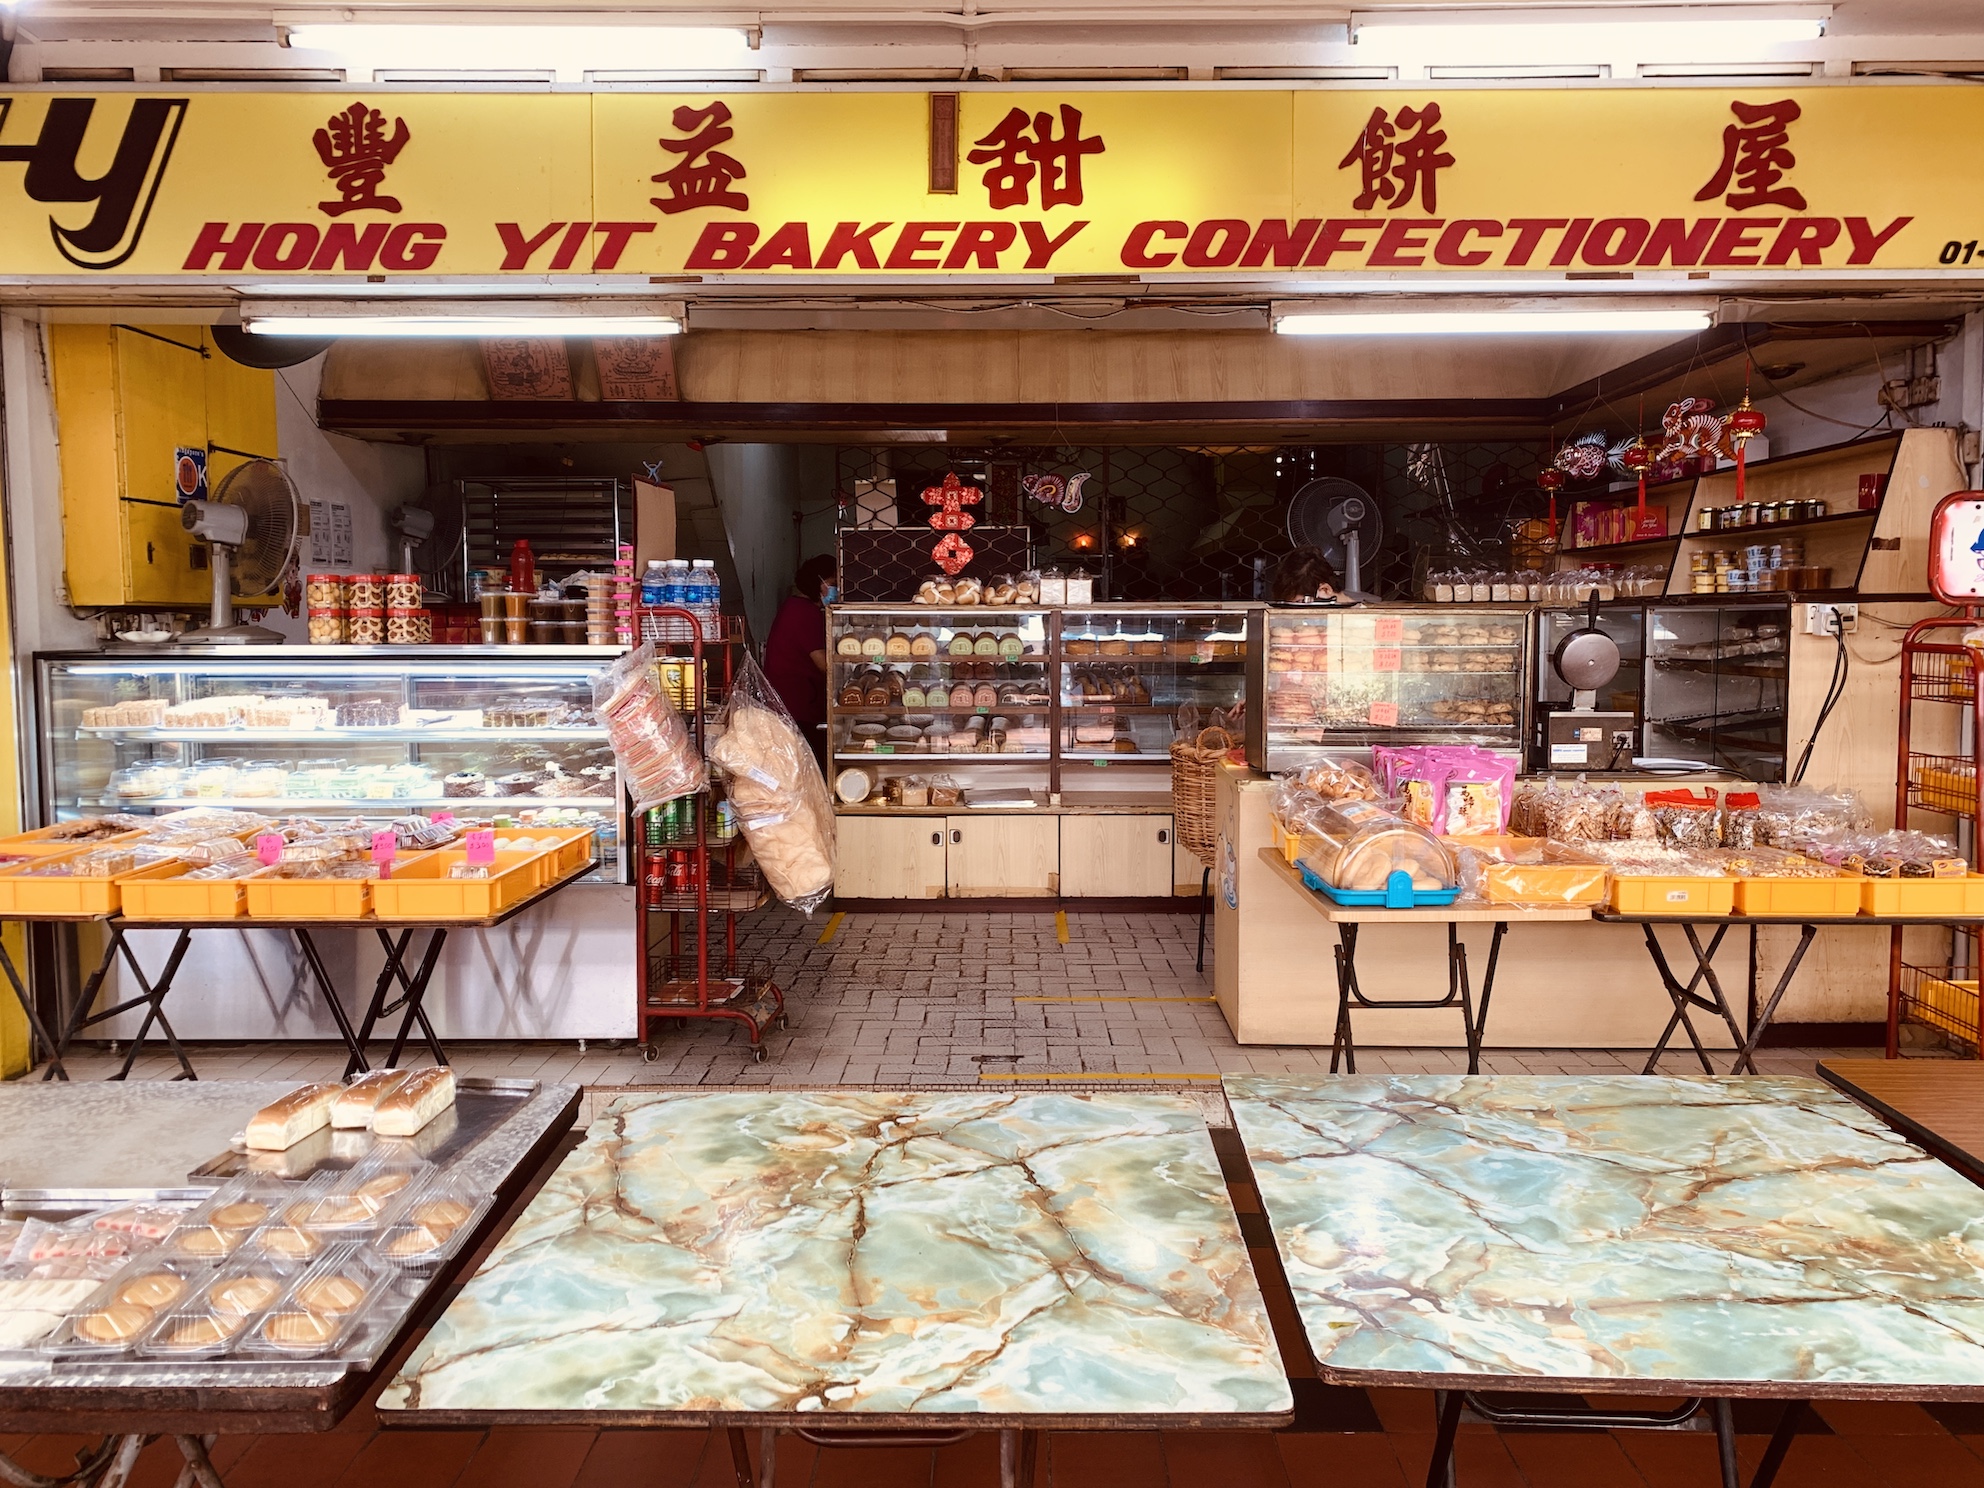 Hong Yit Bakery & Confectionery - Shop Front